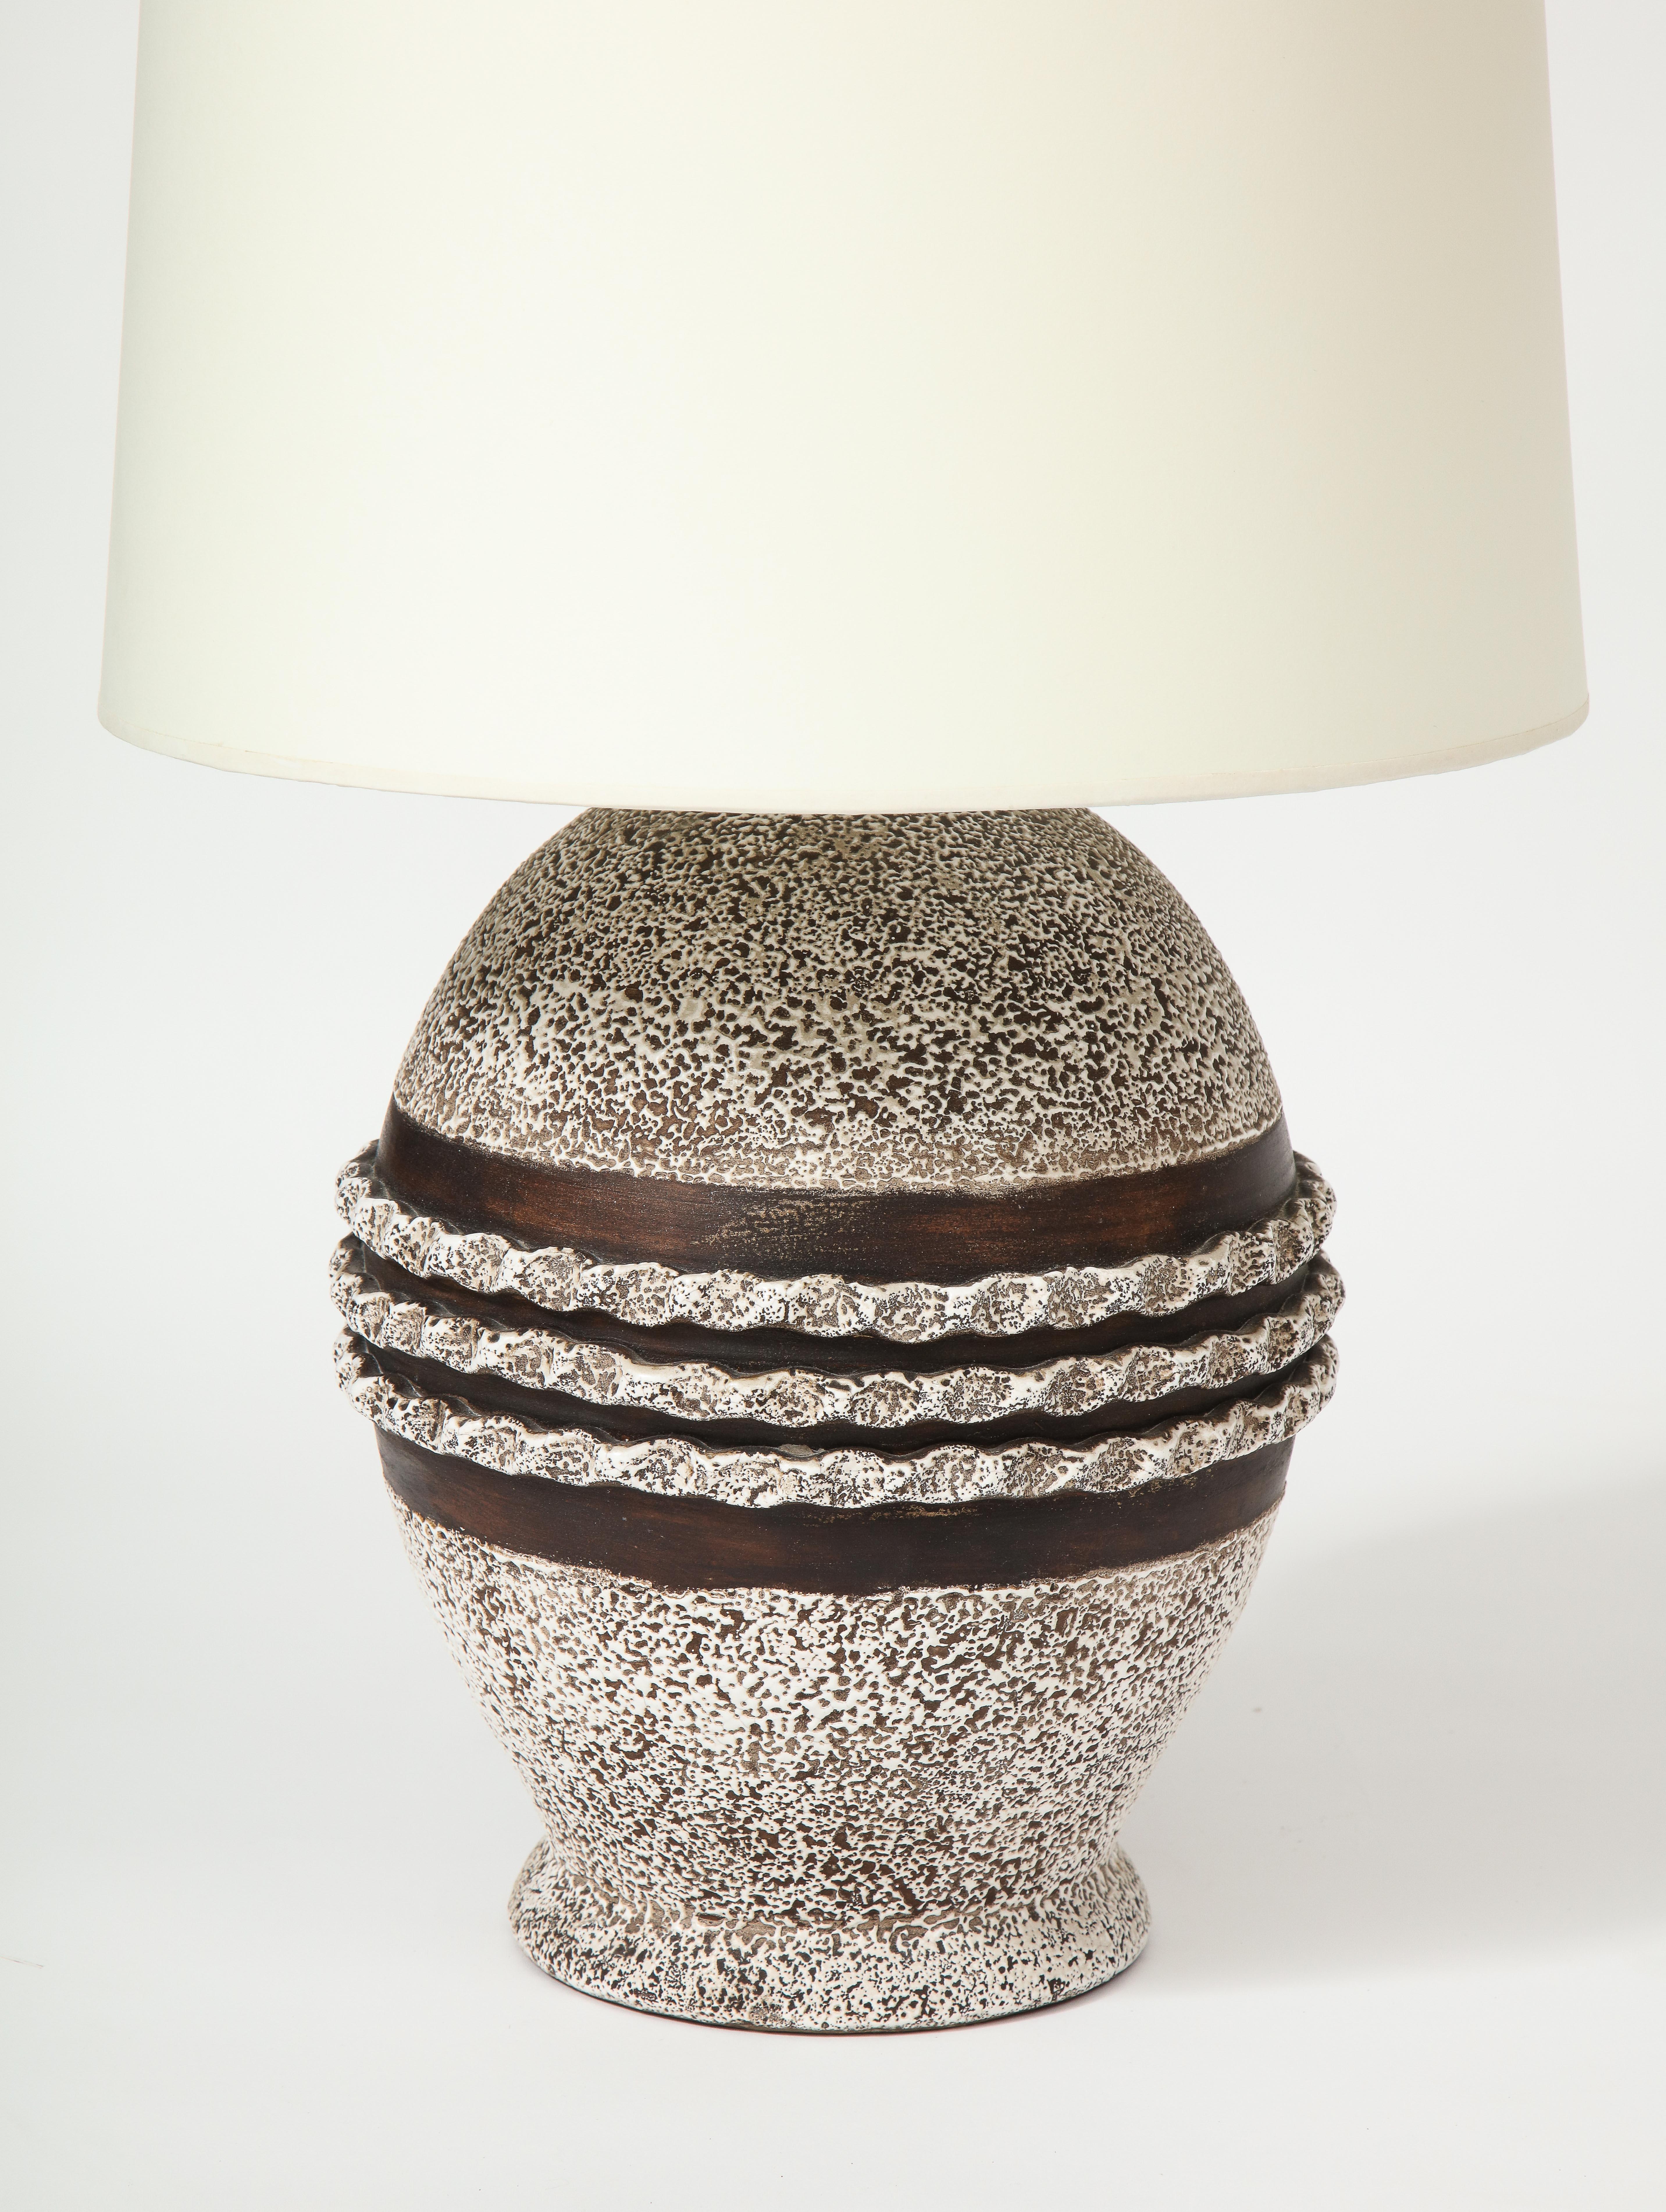 Ceramic lamp in the style of Jean Besnard, France, c. 1930-40
Vermicule decoration, Custom-made parchment paper shade
Ceramic, bronze hardware
Measures: Height 24, diameter 9 in.